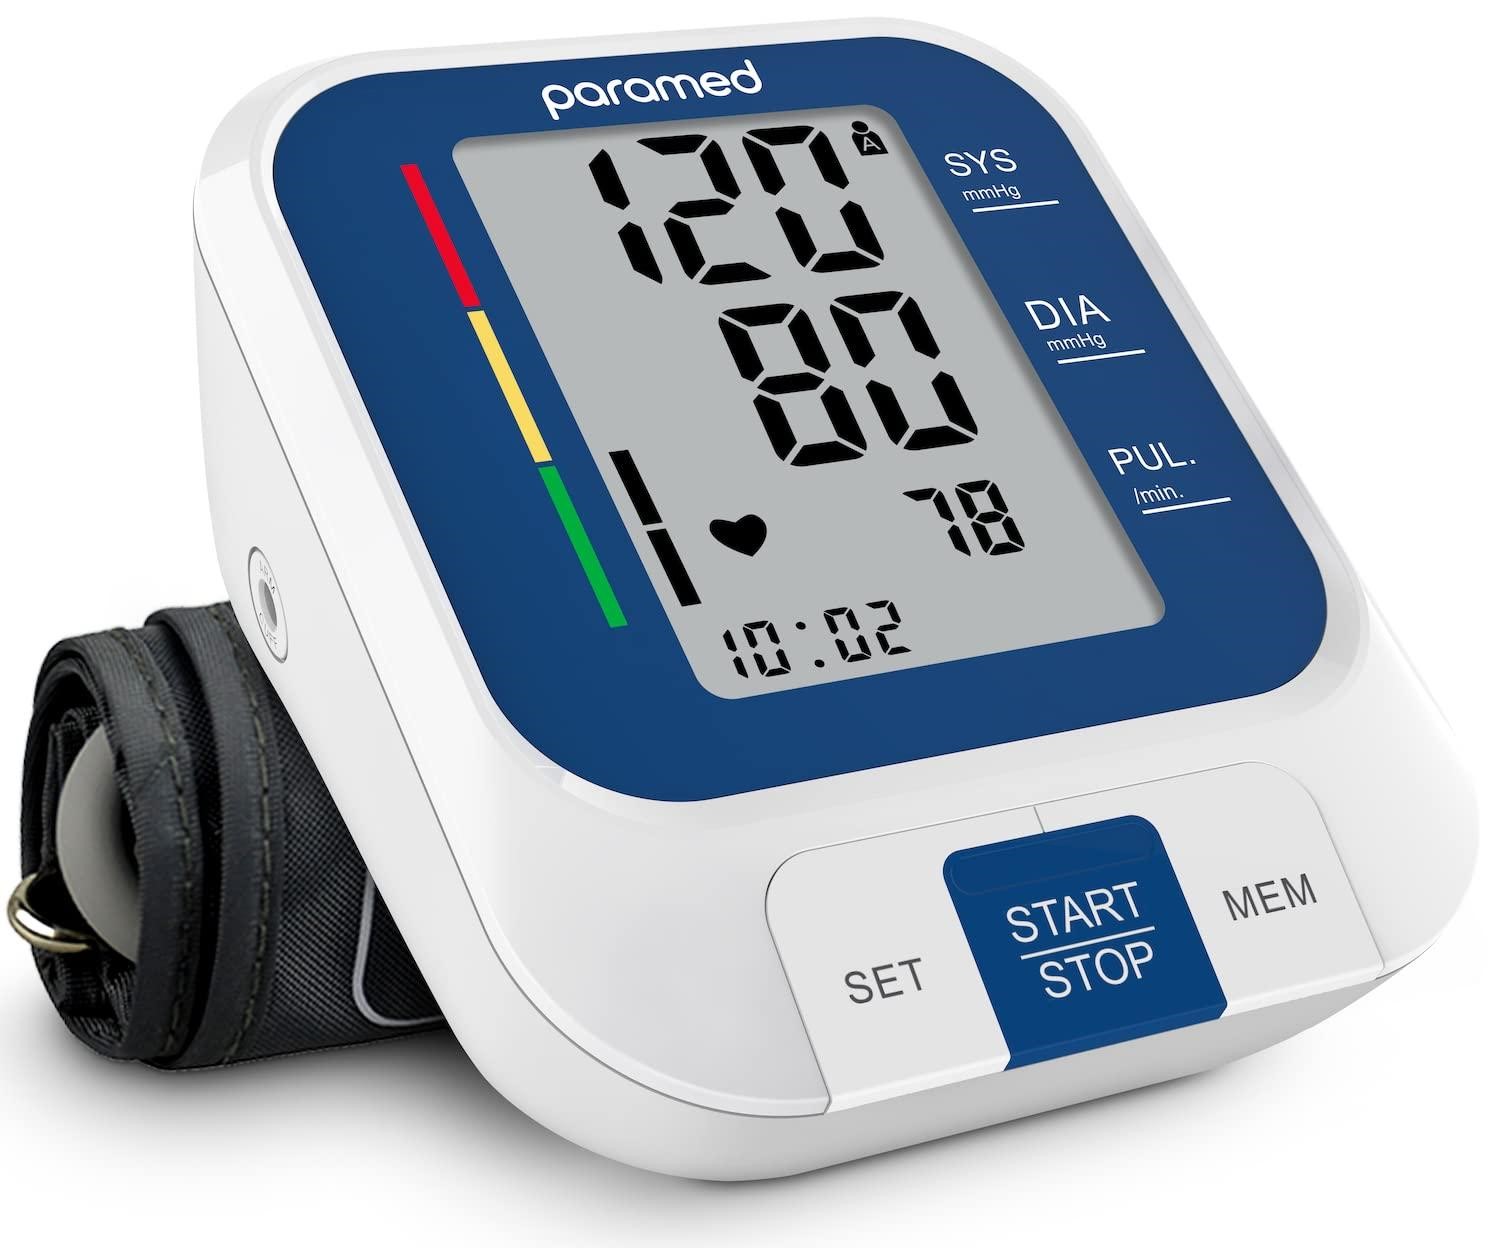 Why is it important to monitor your blood pressure at home